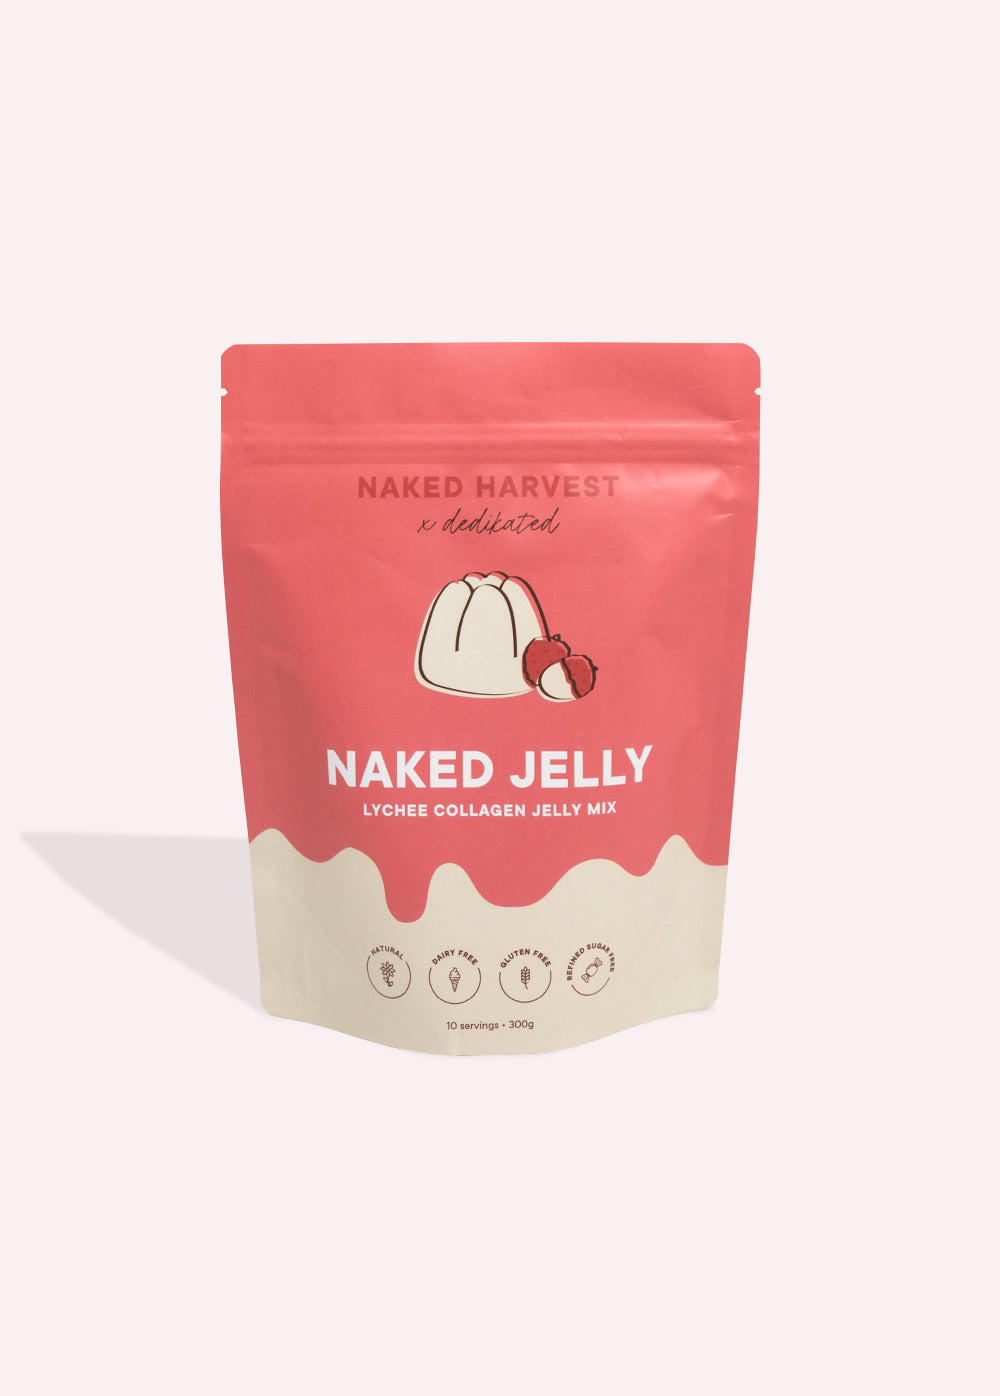 NH x DediKated Naked Jelly Lychee Collagen